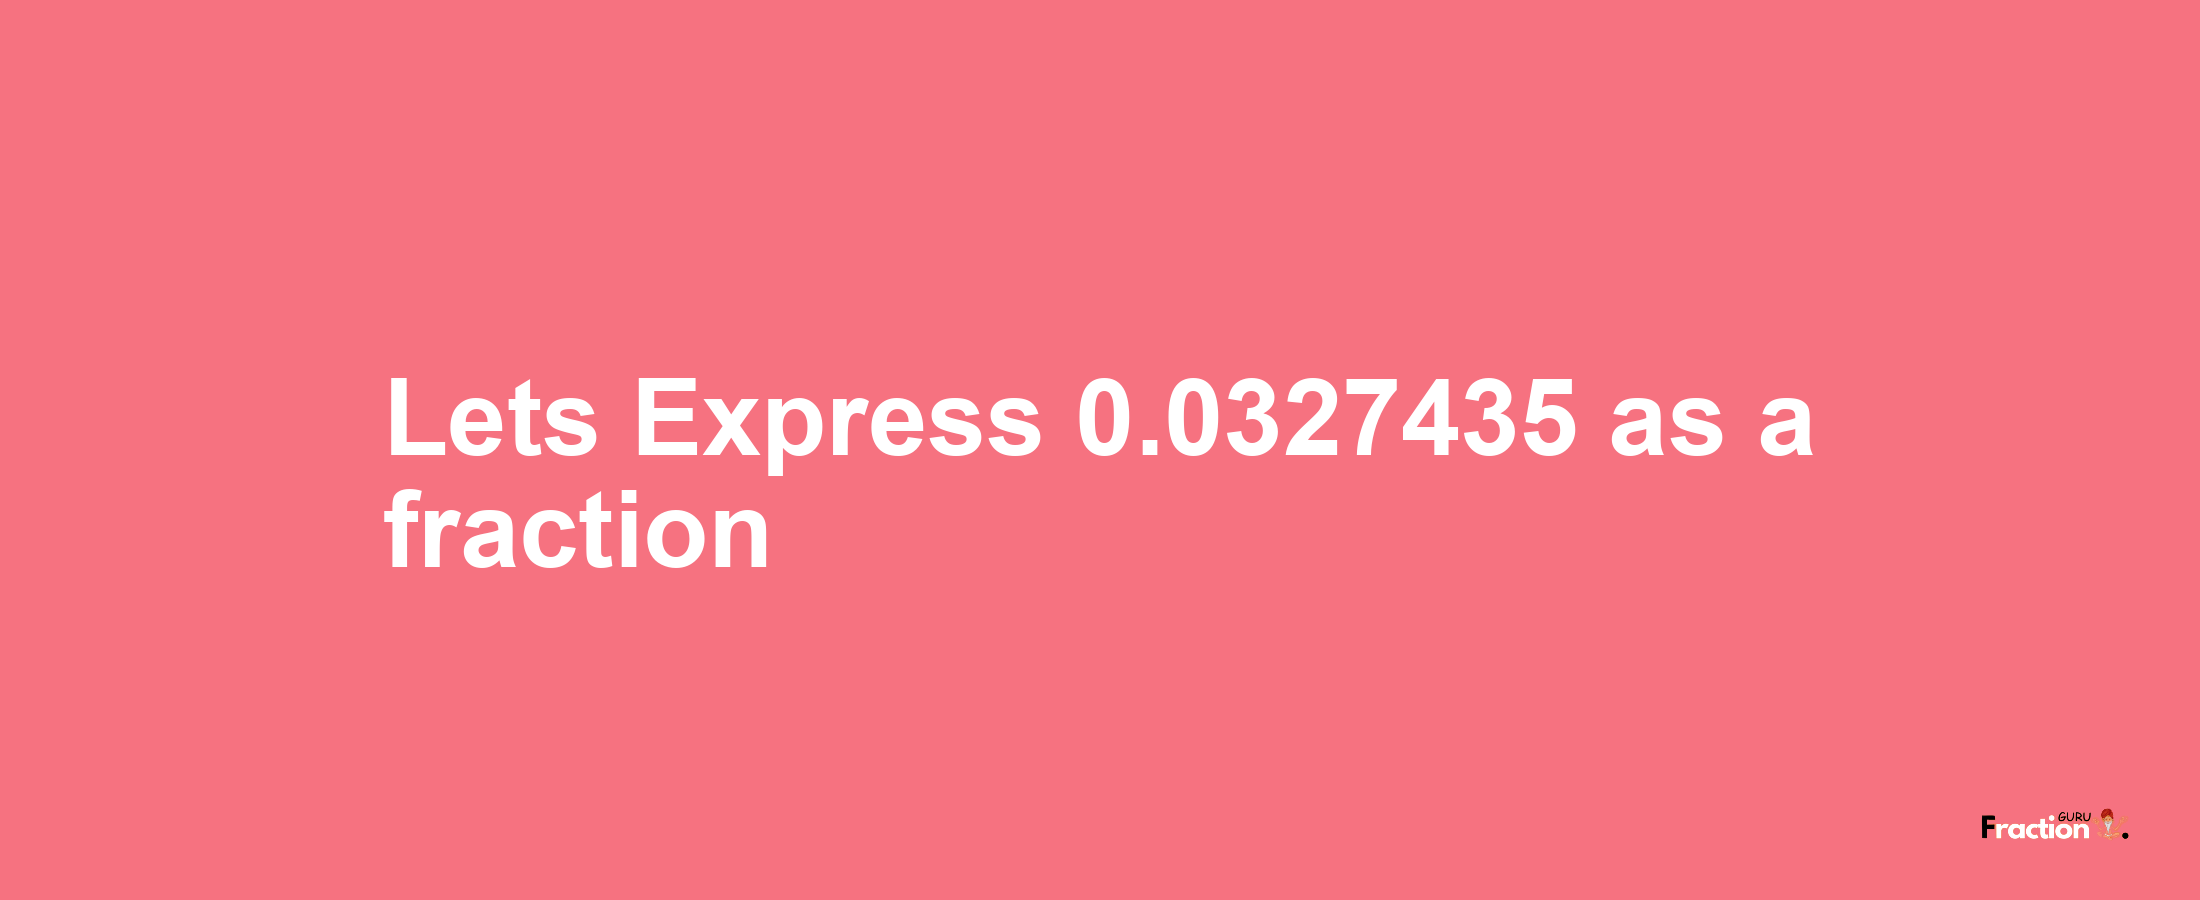 Lets Express 0.0327435 as afraction